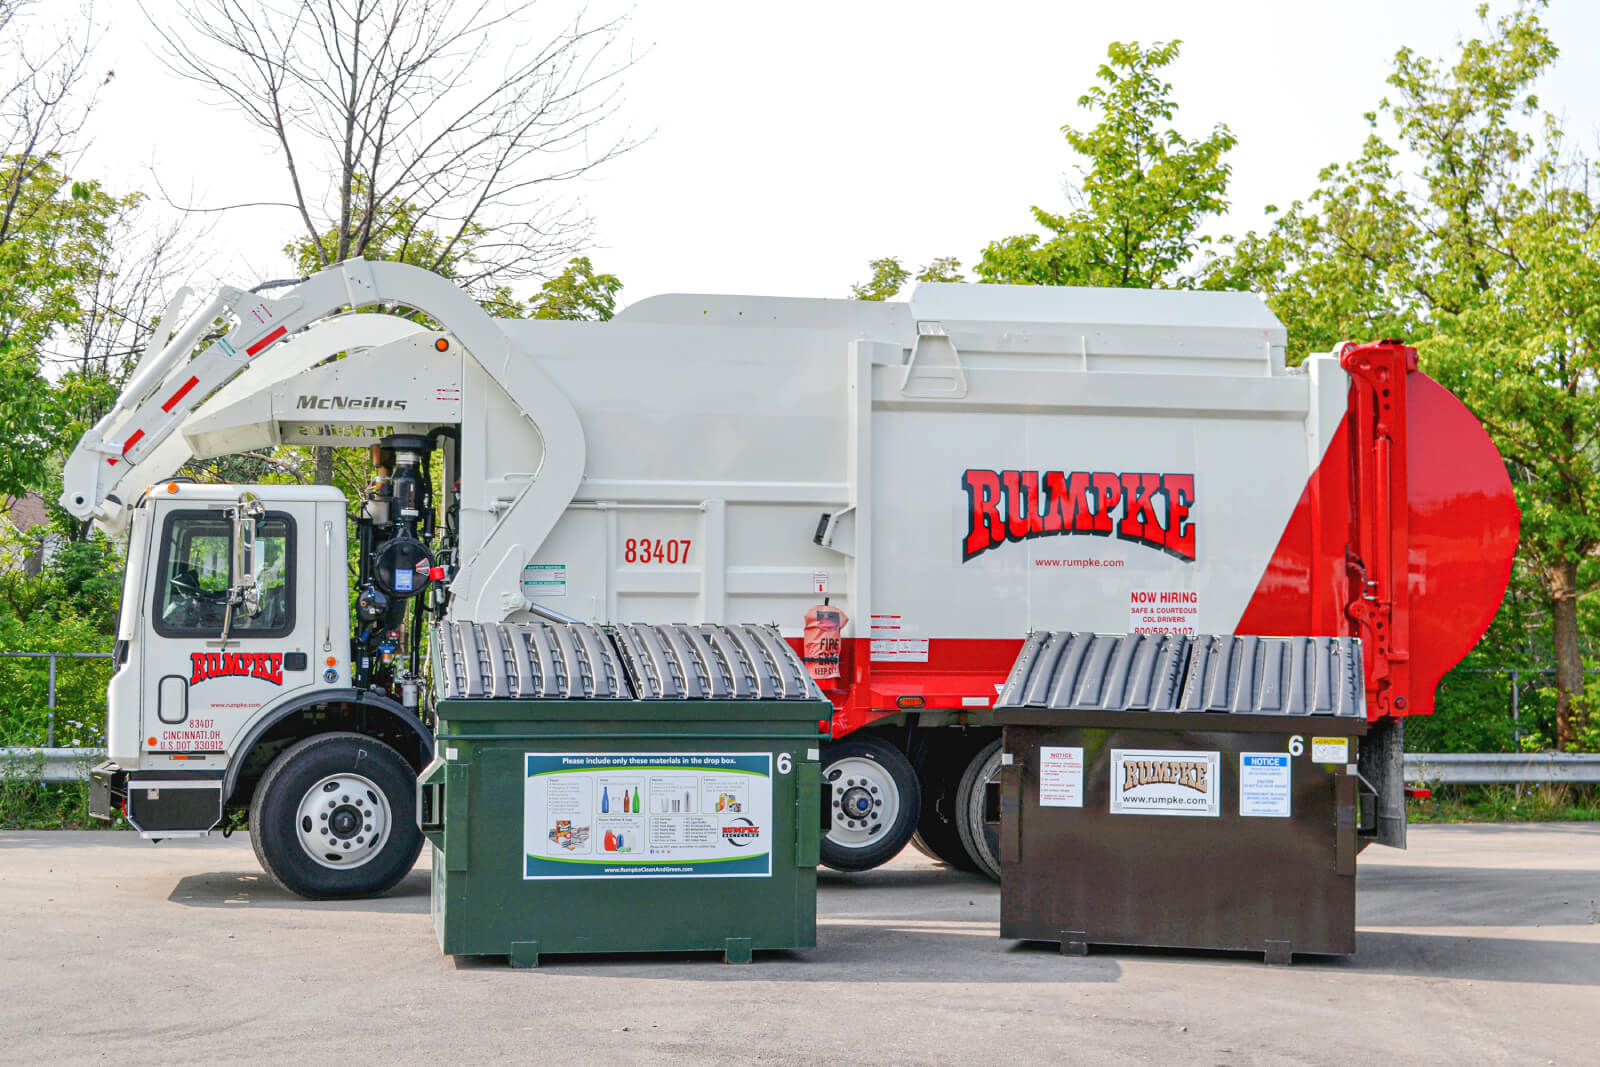 Rumpke Truck And Two Dumpsters For Commercial Waste Pickup